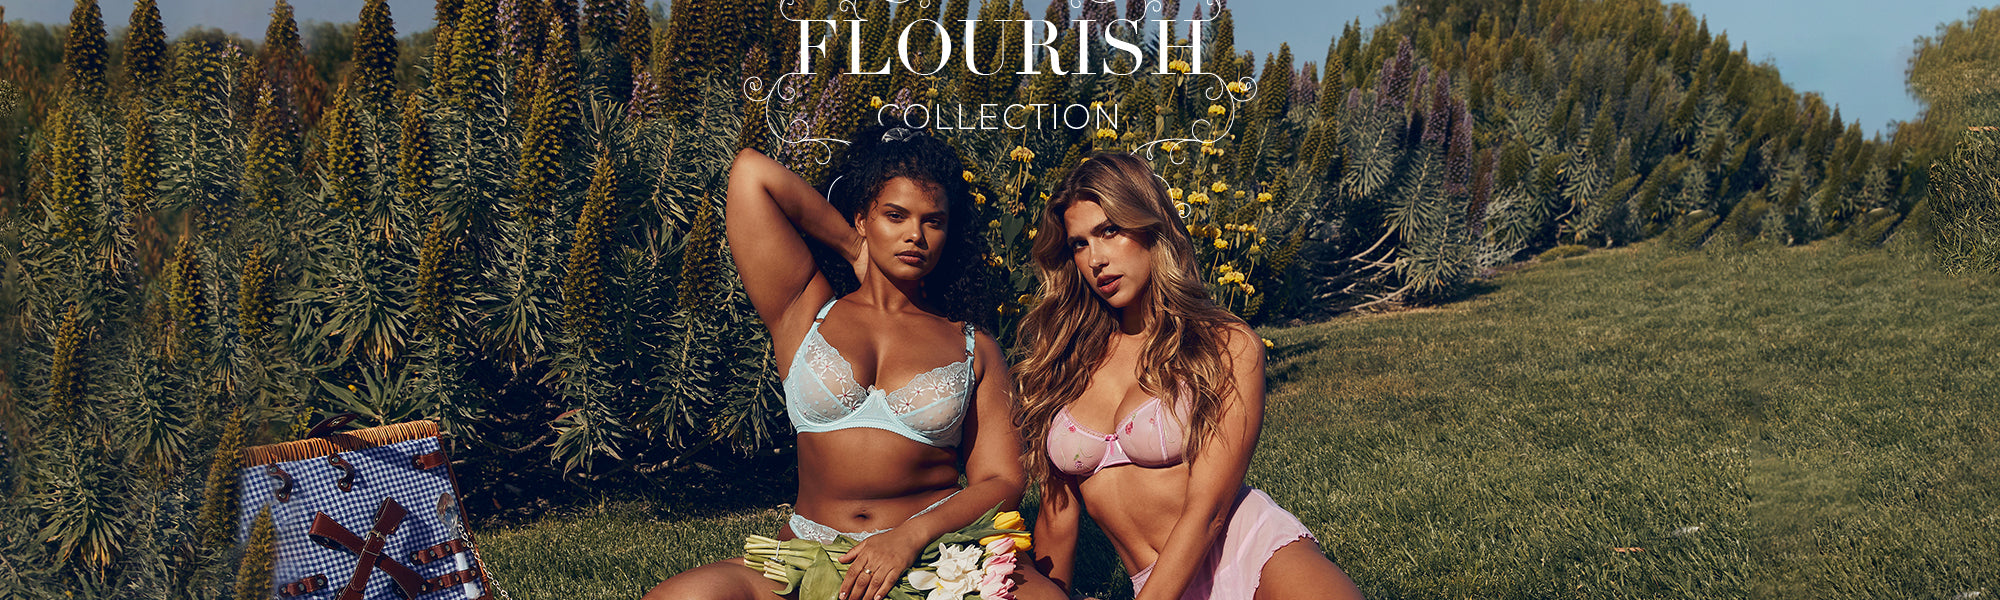 The Flourish Collection – Coming Soon